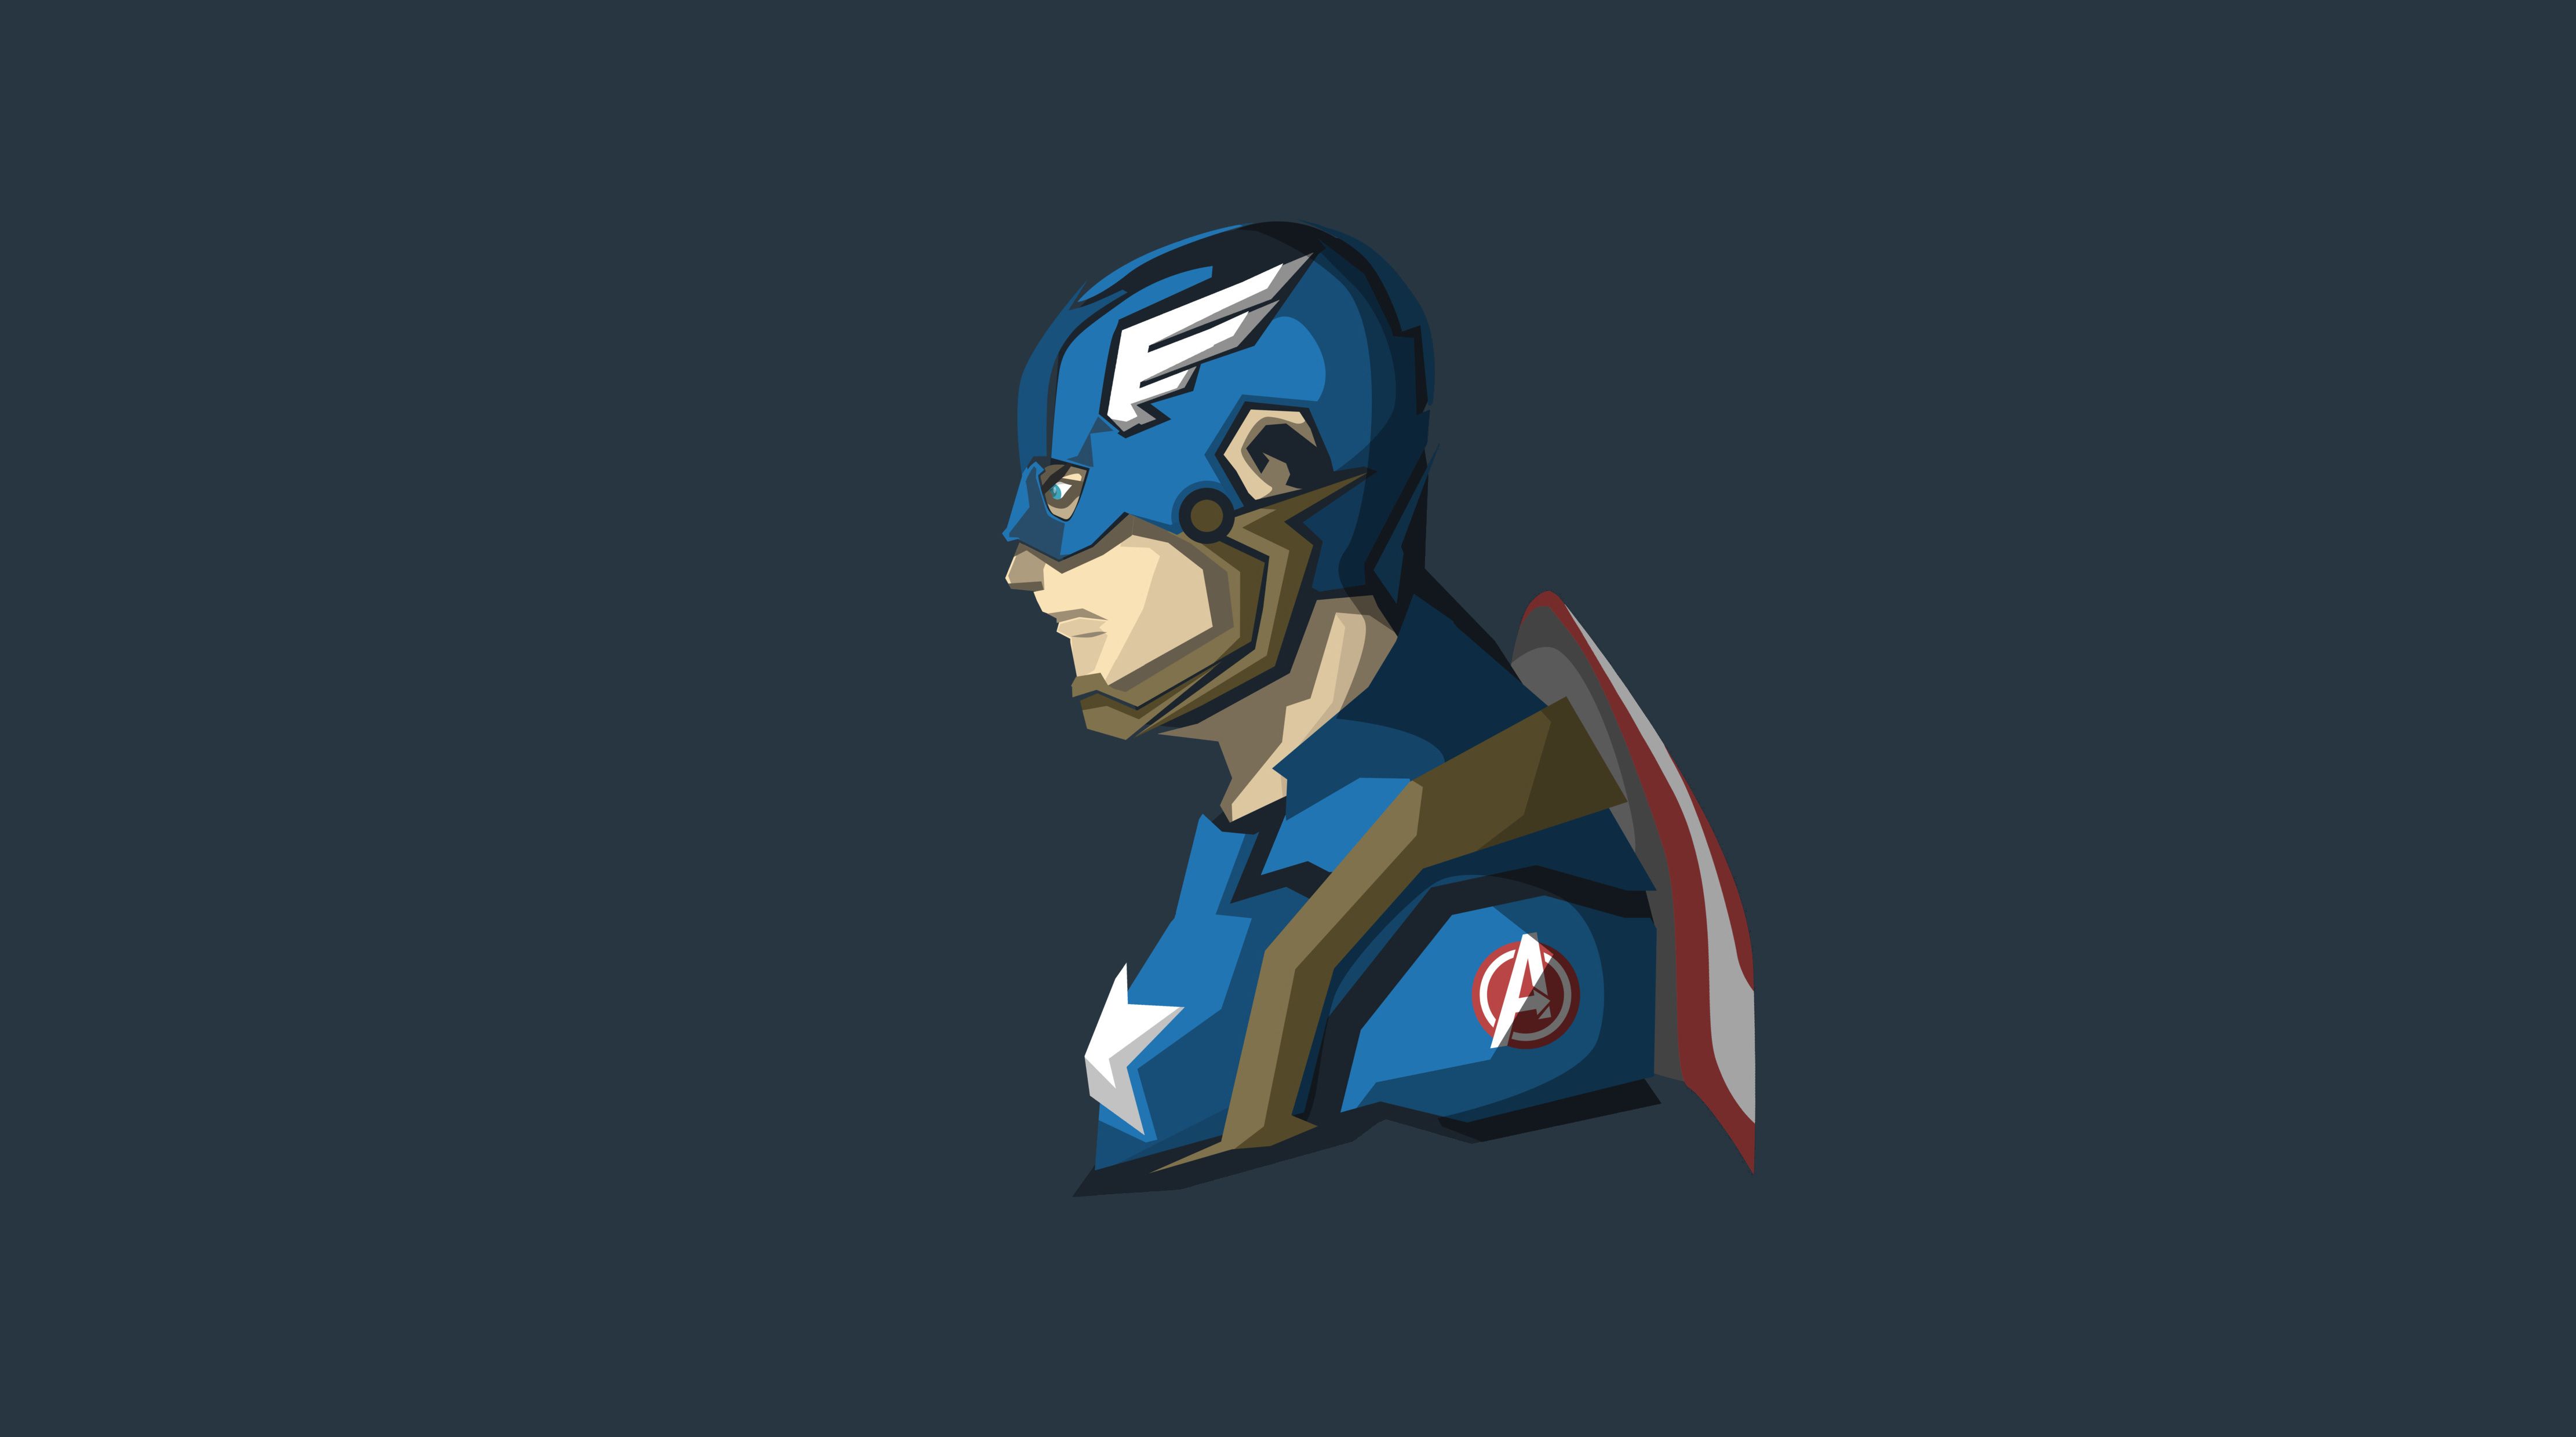 Captain America 4k Minimalism, HD Superheroes, 4k Wallpaper, Image, Background, Photo and Picture